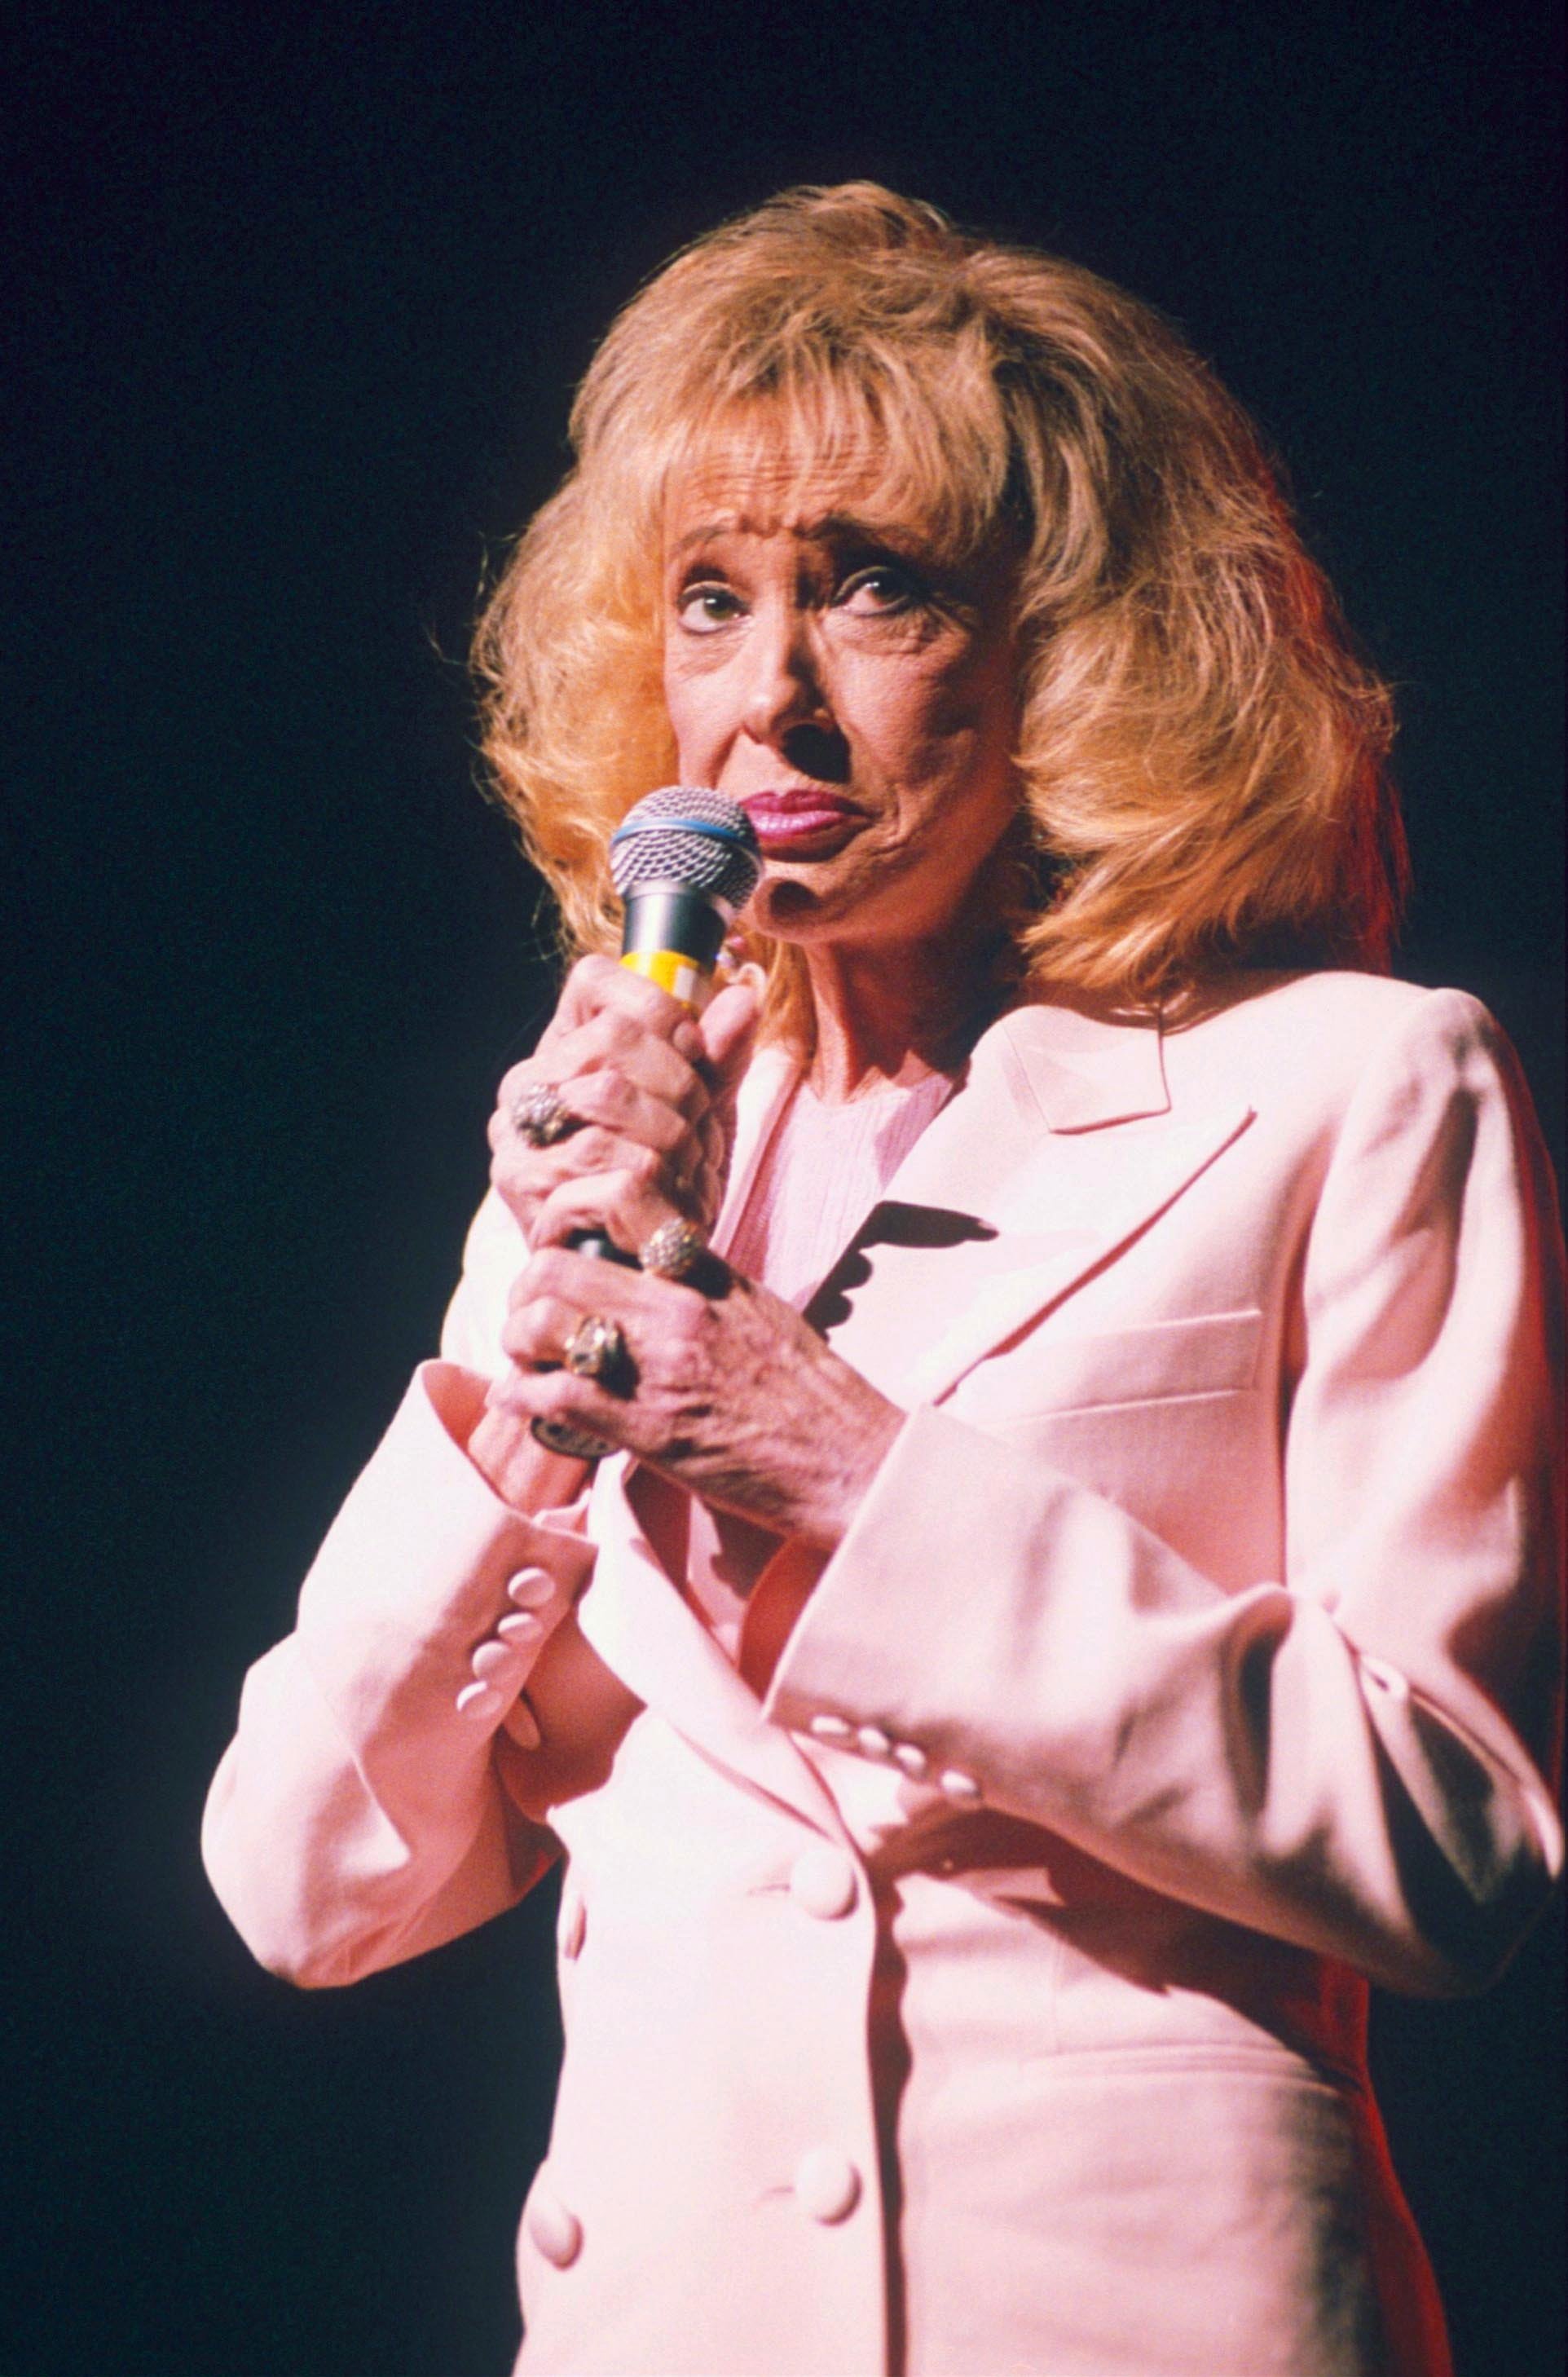 Tammy Wynette performs at Hammersmith Apollo, London, Britain, Sep 1995. | Source: Getty Images